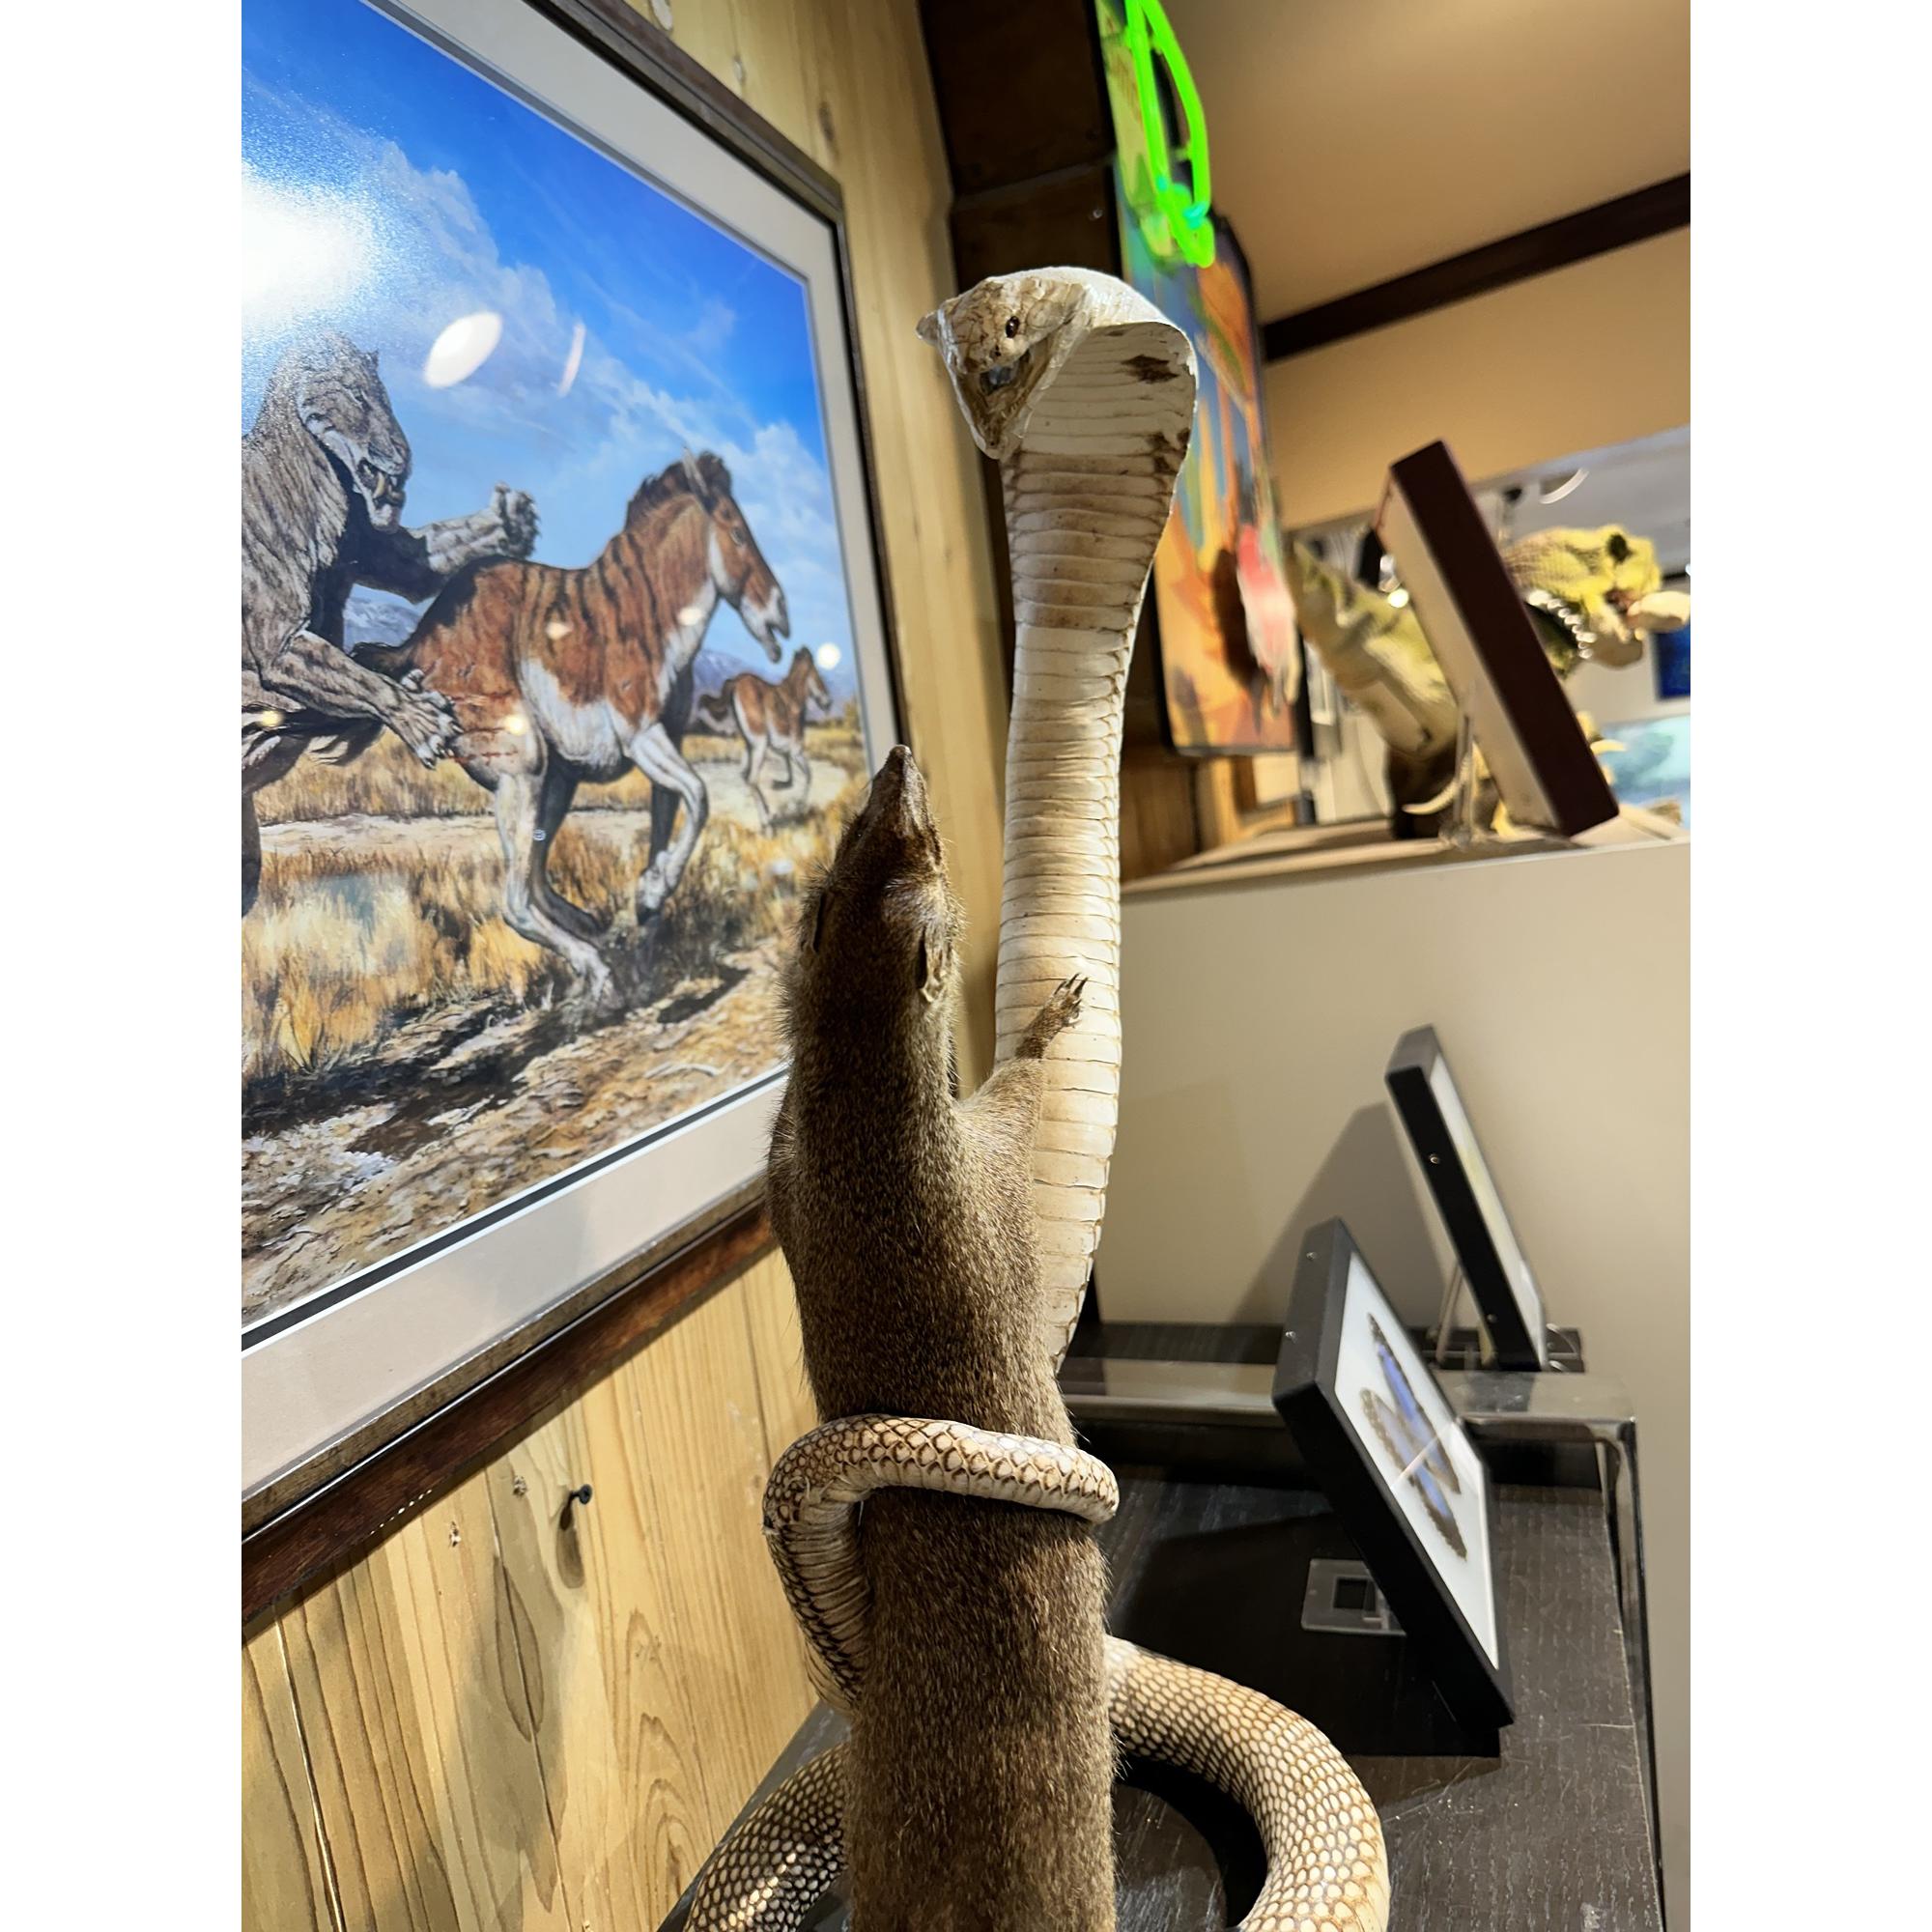 Cobra fighting Mongoose Taxidermy, Vintage, hand stitched Prehistoric Online